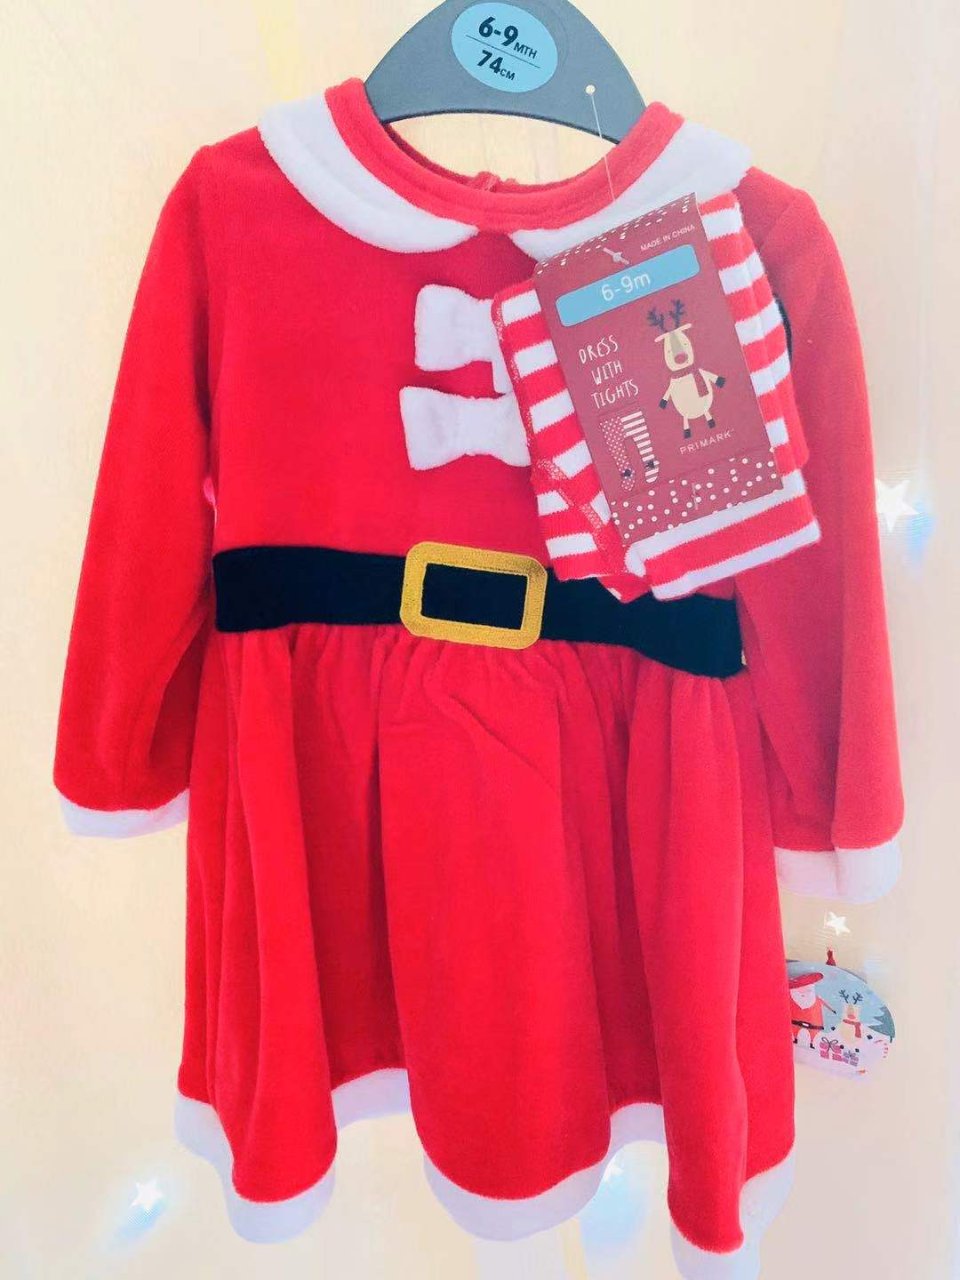 Primark,Merry Christmas,Christmas dress with tight